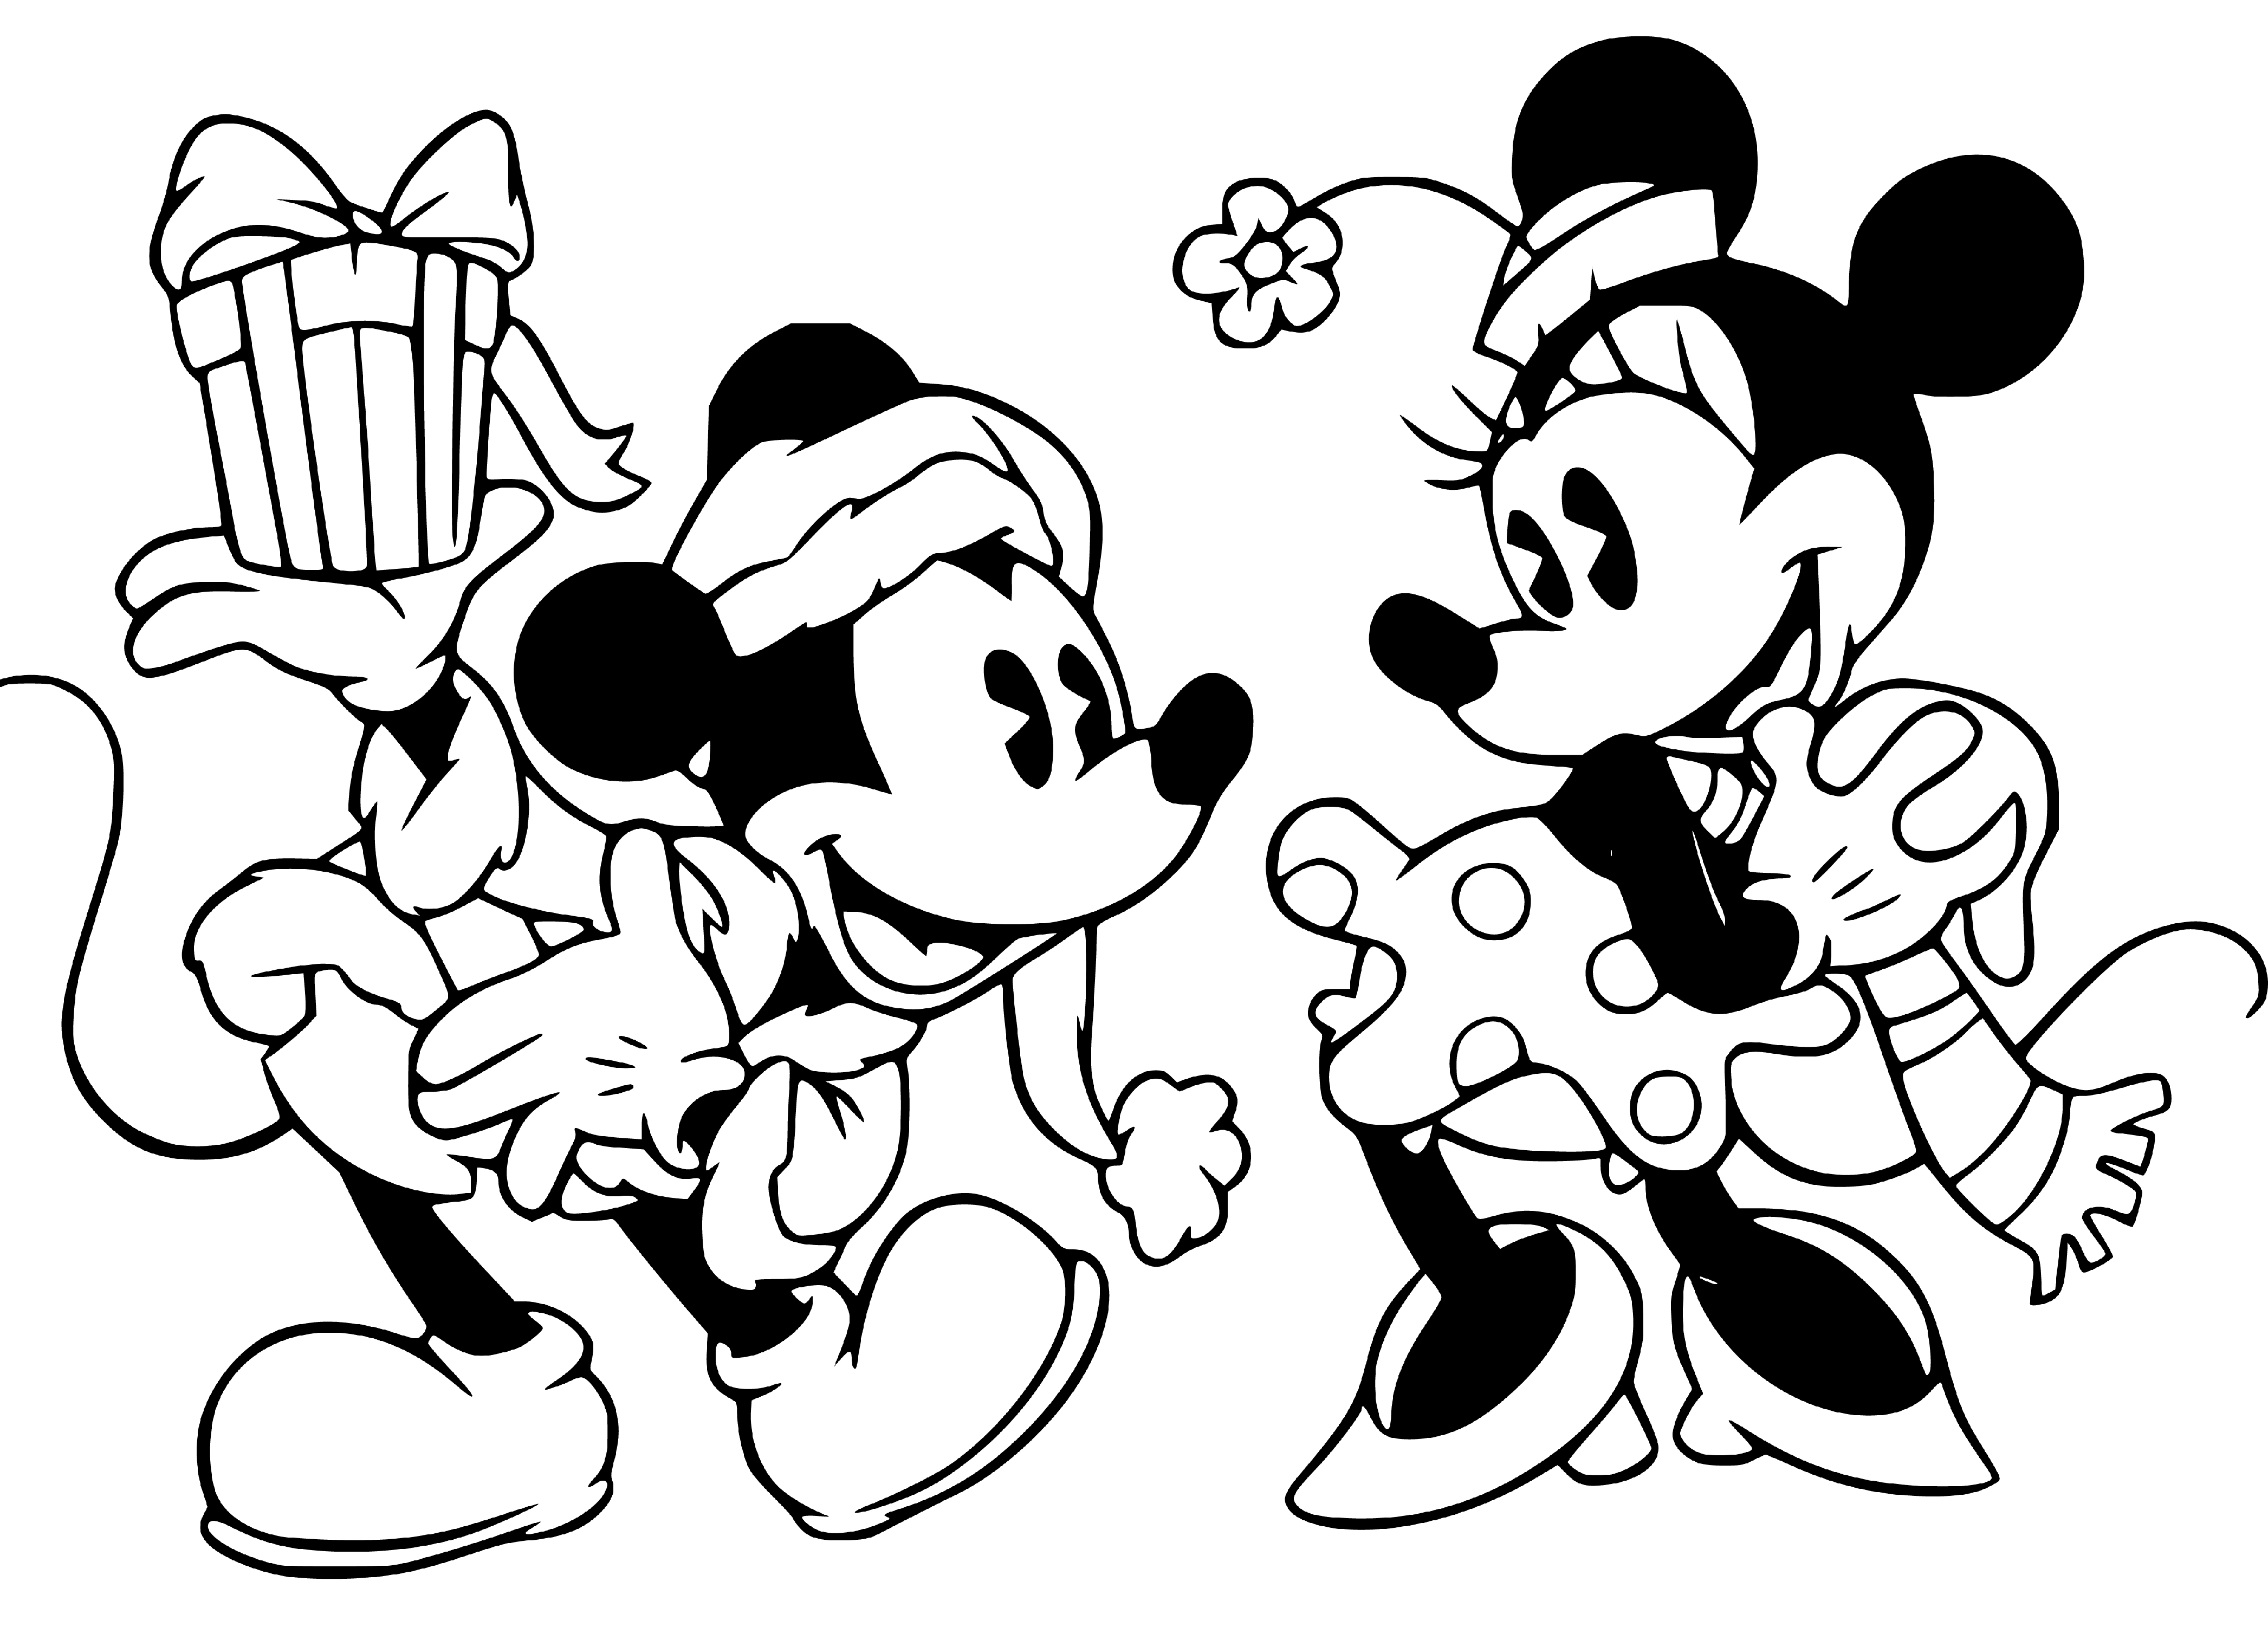 Printable Mickey and Minnie Mouse blank outline Coloring Page for kids.